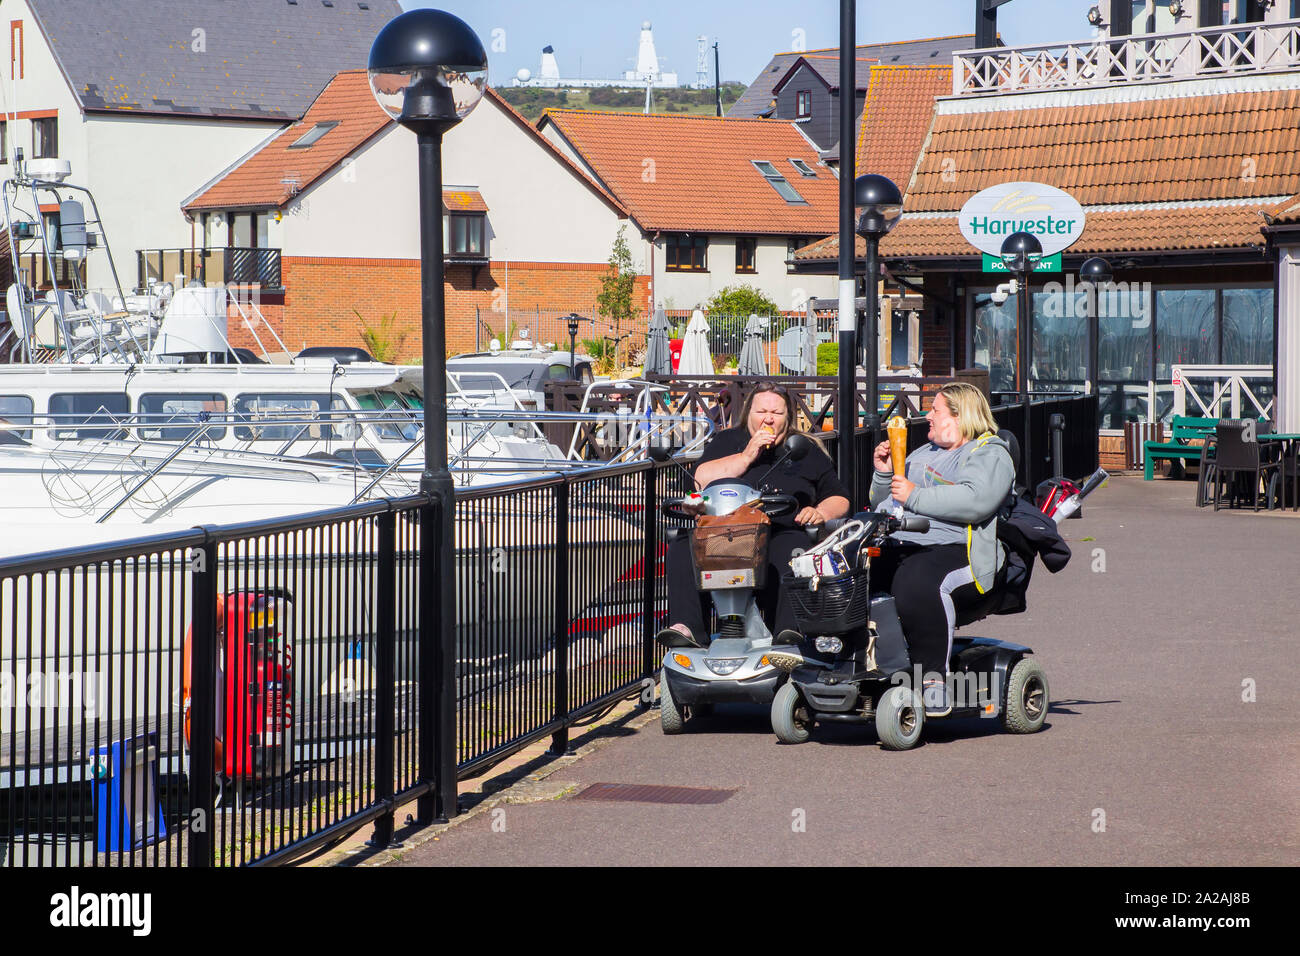 18 september 2019 Two overweight ladies eating and enjoying very large ice cream cones at the Port Solent Marina complex in Hampshire England Stock Photo